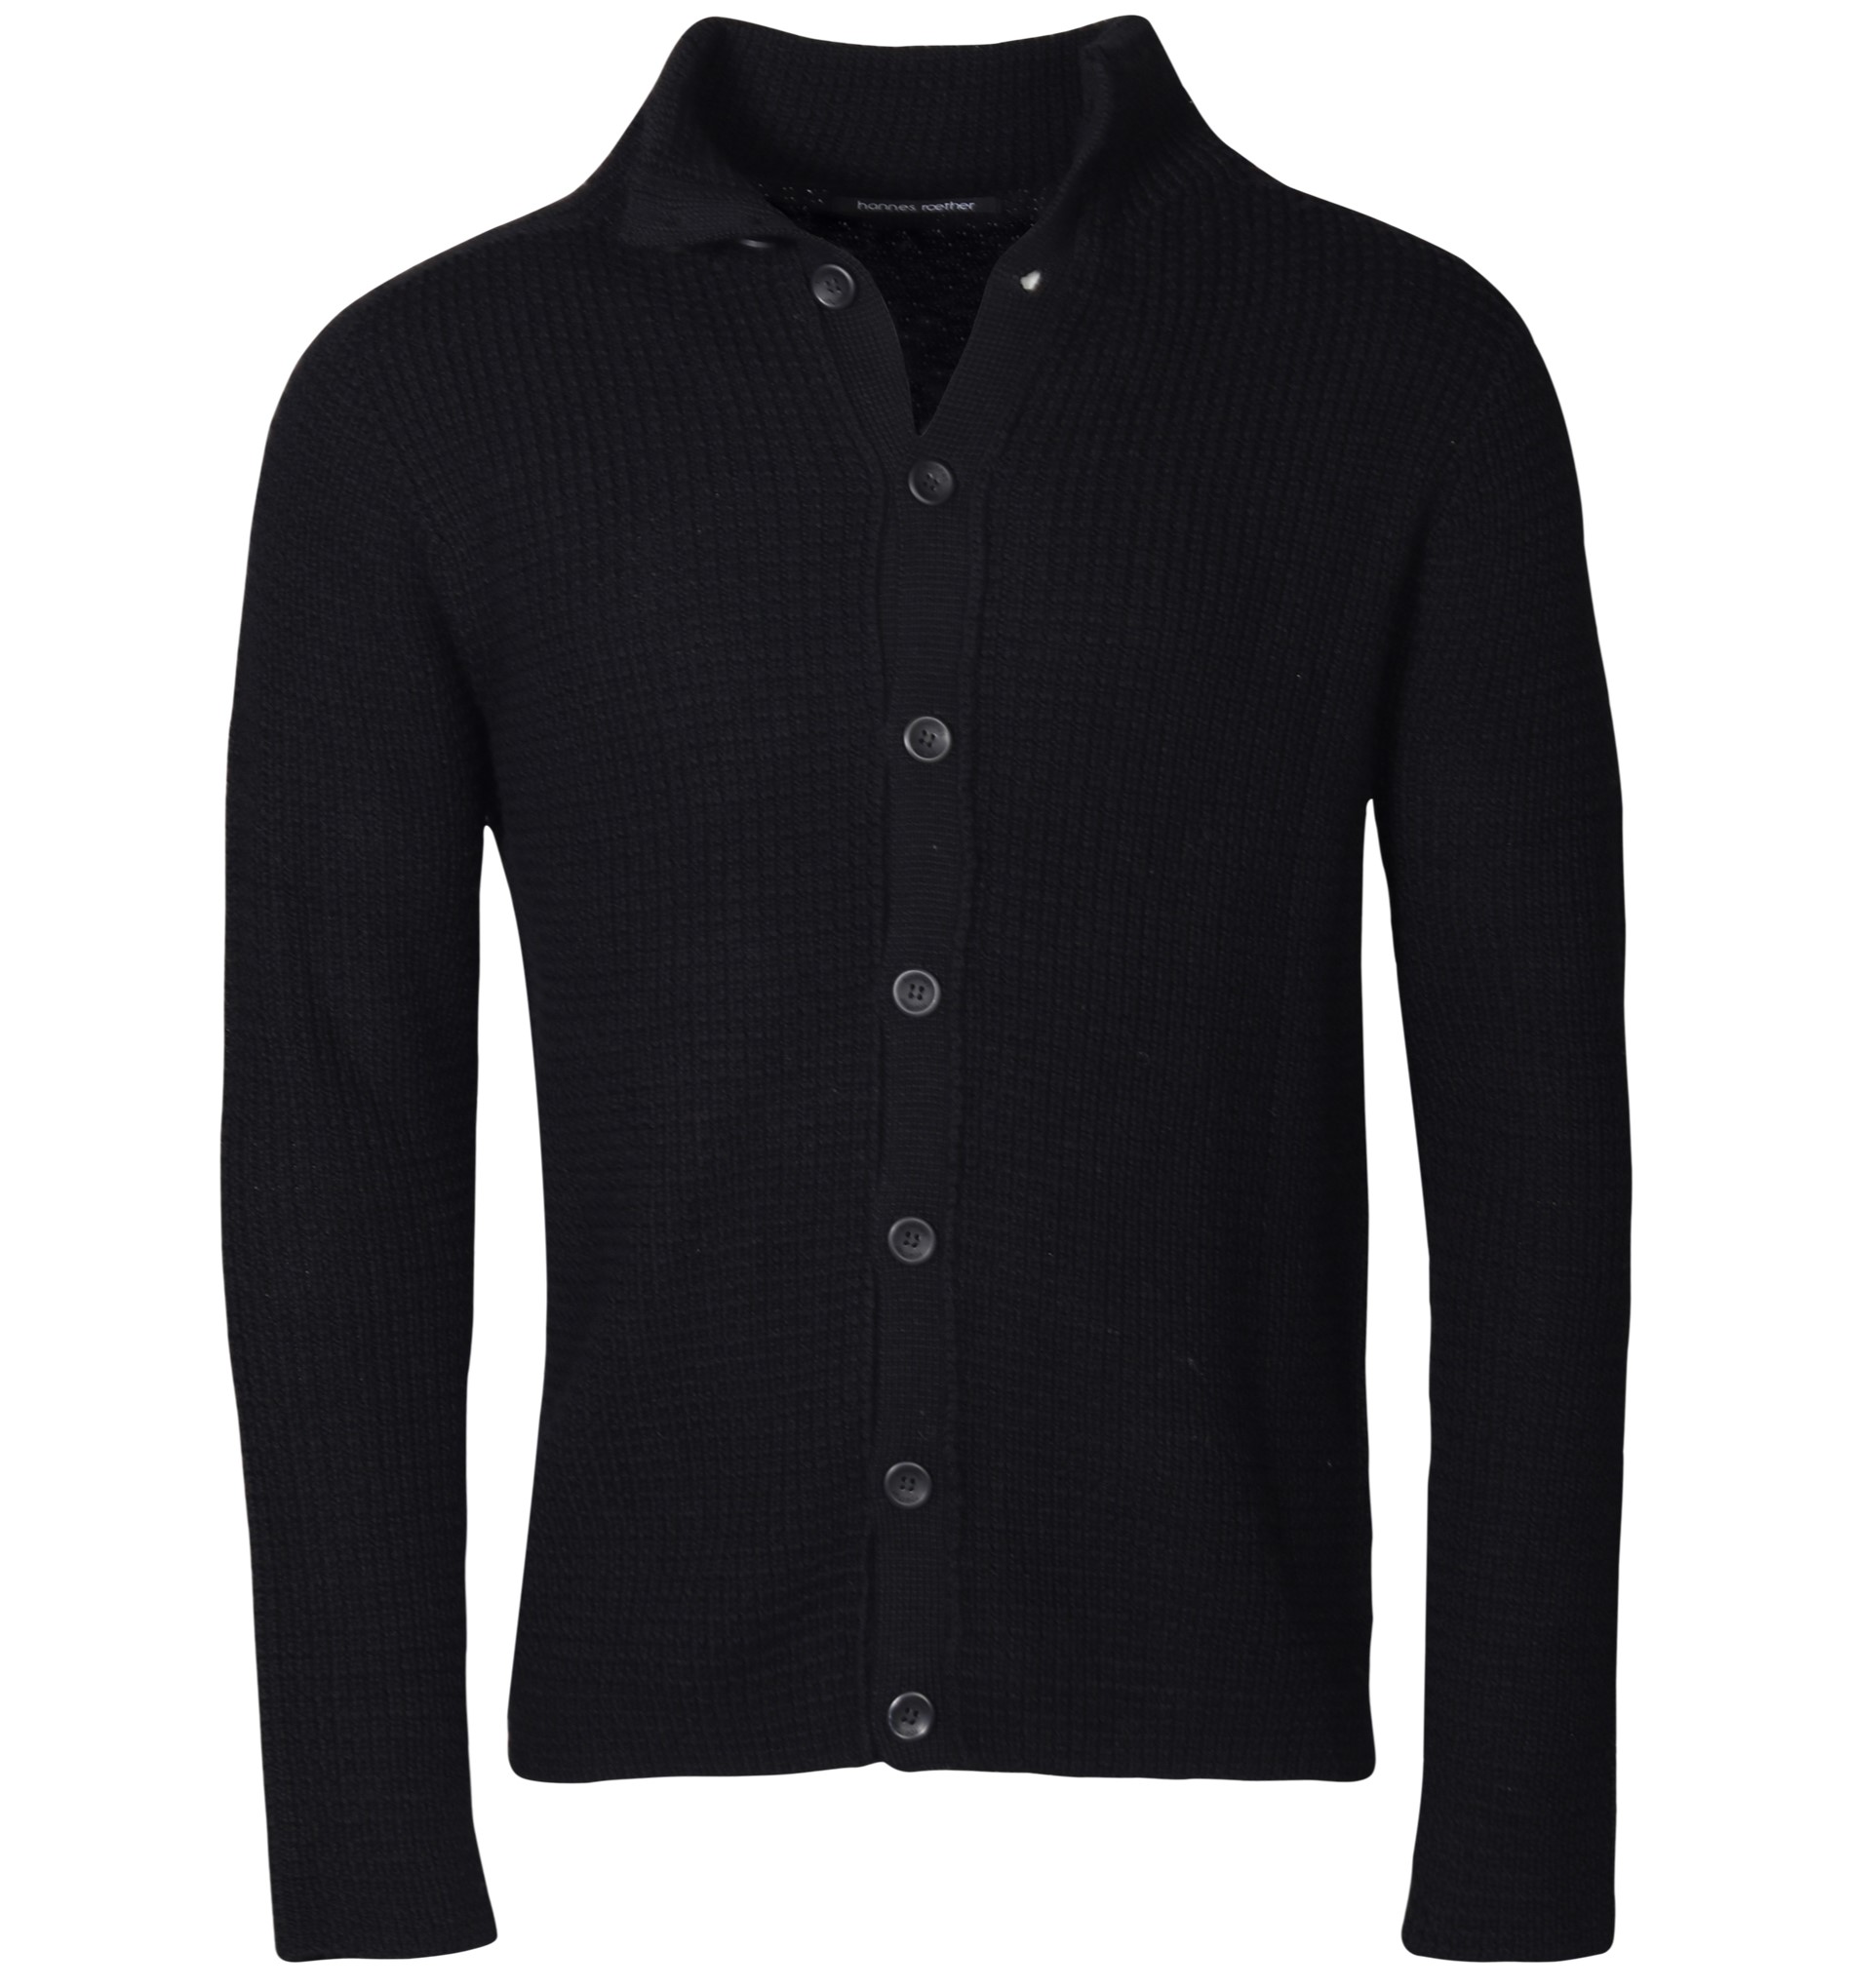 HANNES ROETHER Knit Cardigan in Black